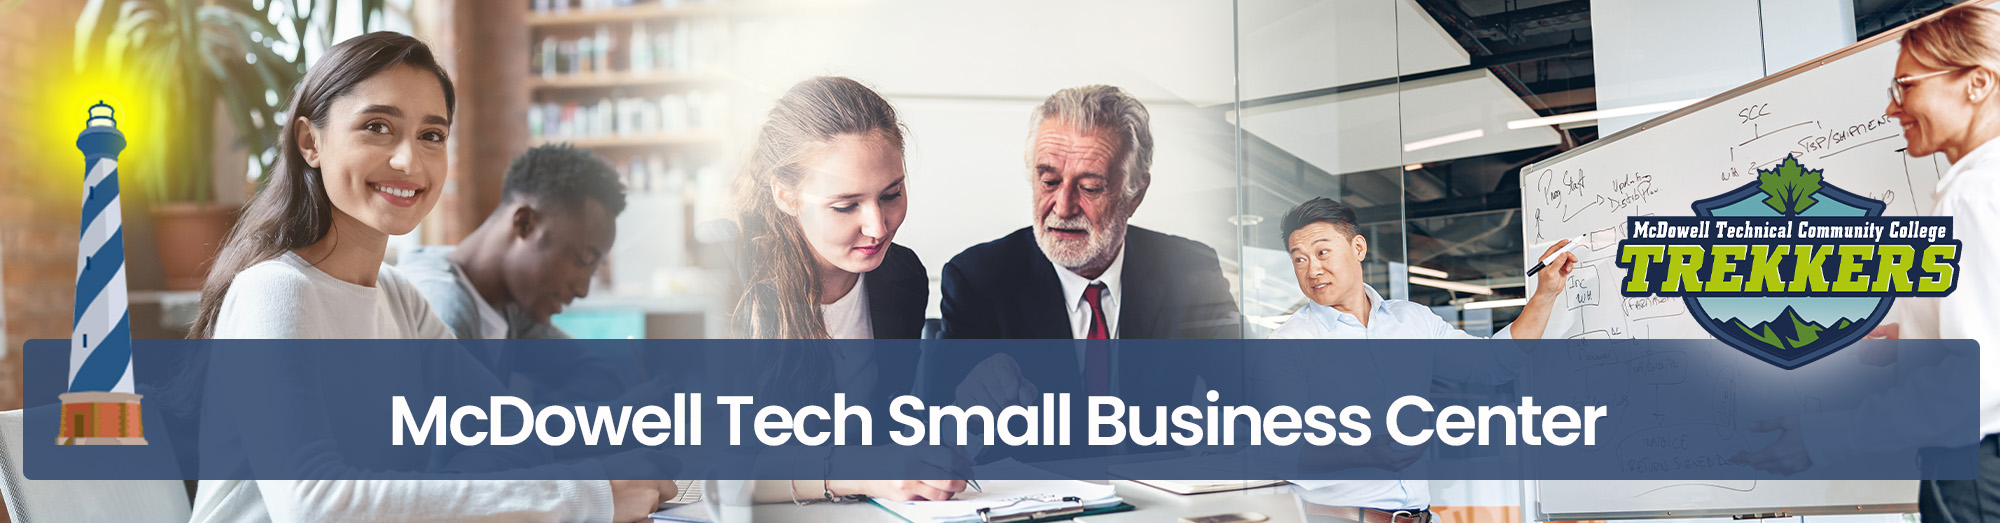 Main header of the Small Business Center, depicting various business people interacting with each other, also included is a lighthouse graphic to the left, and the Trekkers logo to the right.